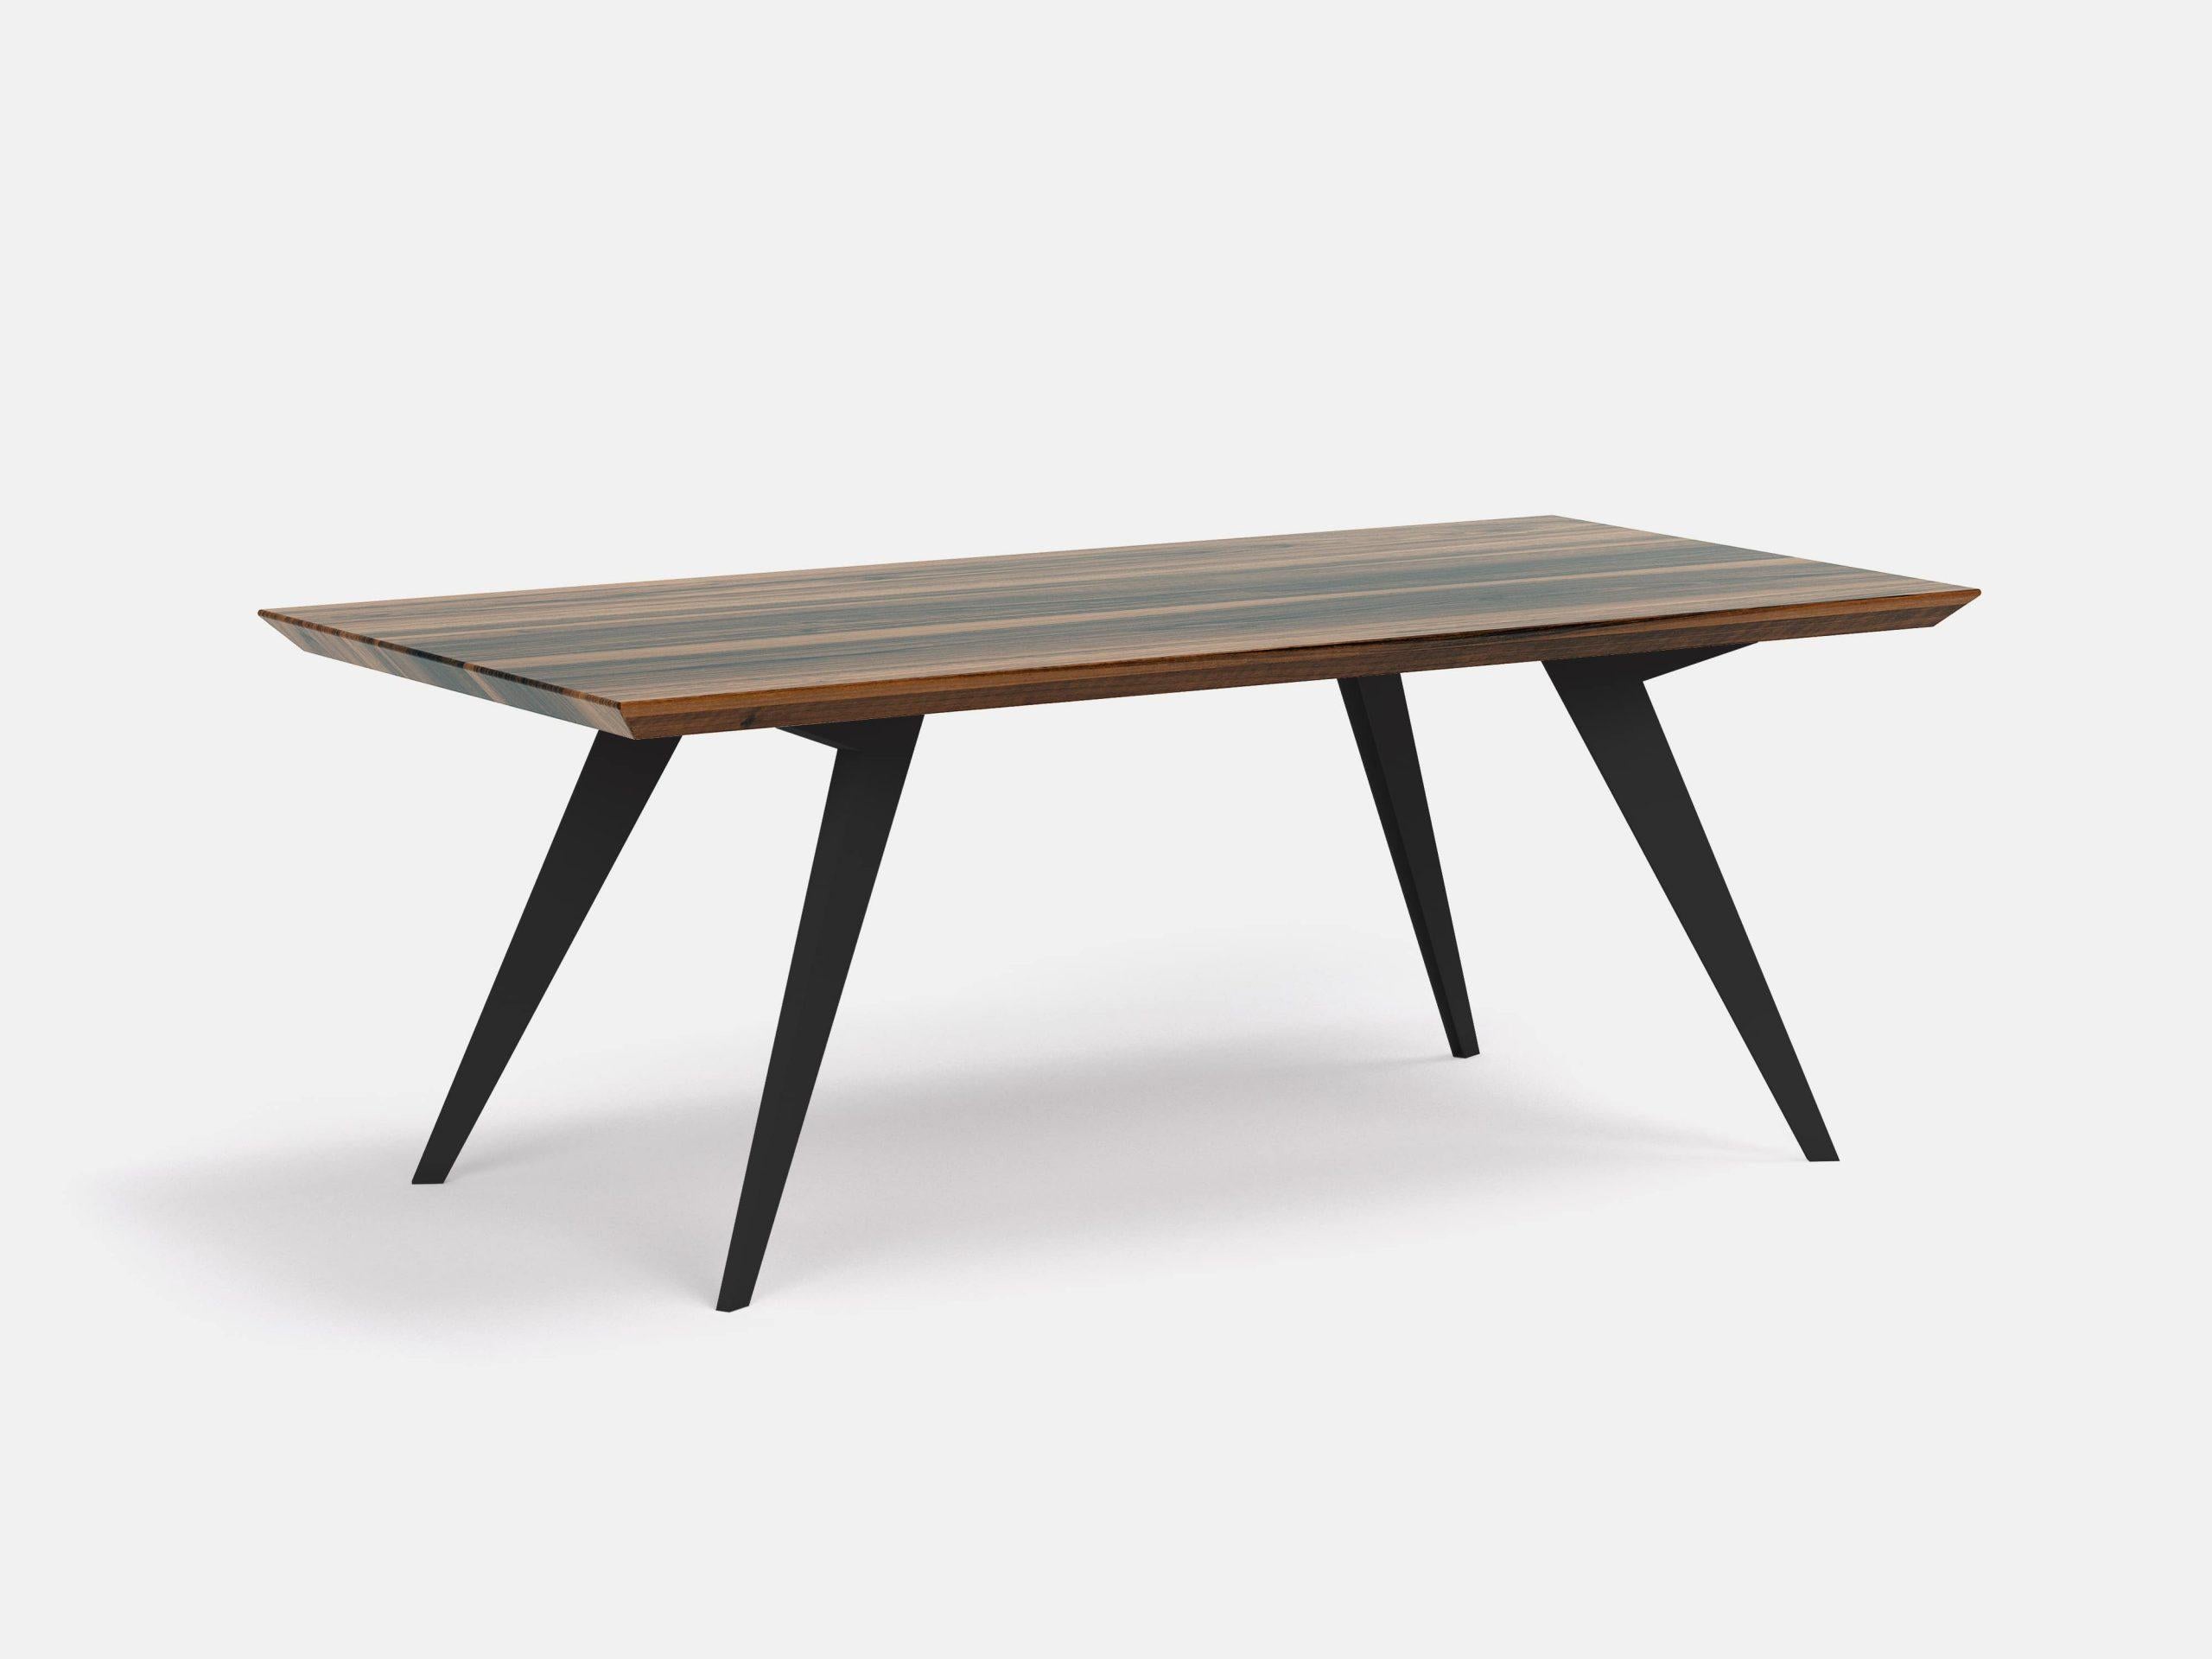 Walnut and steel Minimalist 250 dining table 
Dimensions: W 250 x D 100 x H 75 cm
Materials: American walnut 100% solid wood, steel legs

Roly-Poly table is the proof that through design we can create lightness and simplicity even when the